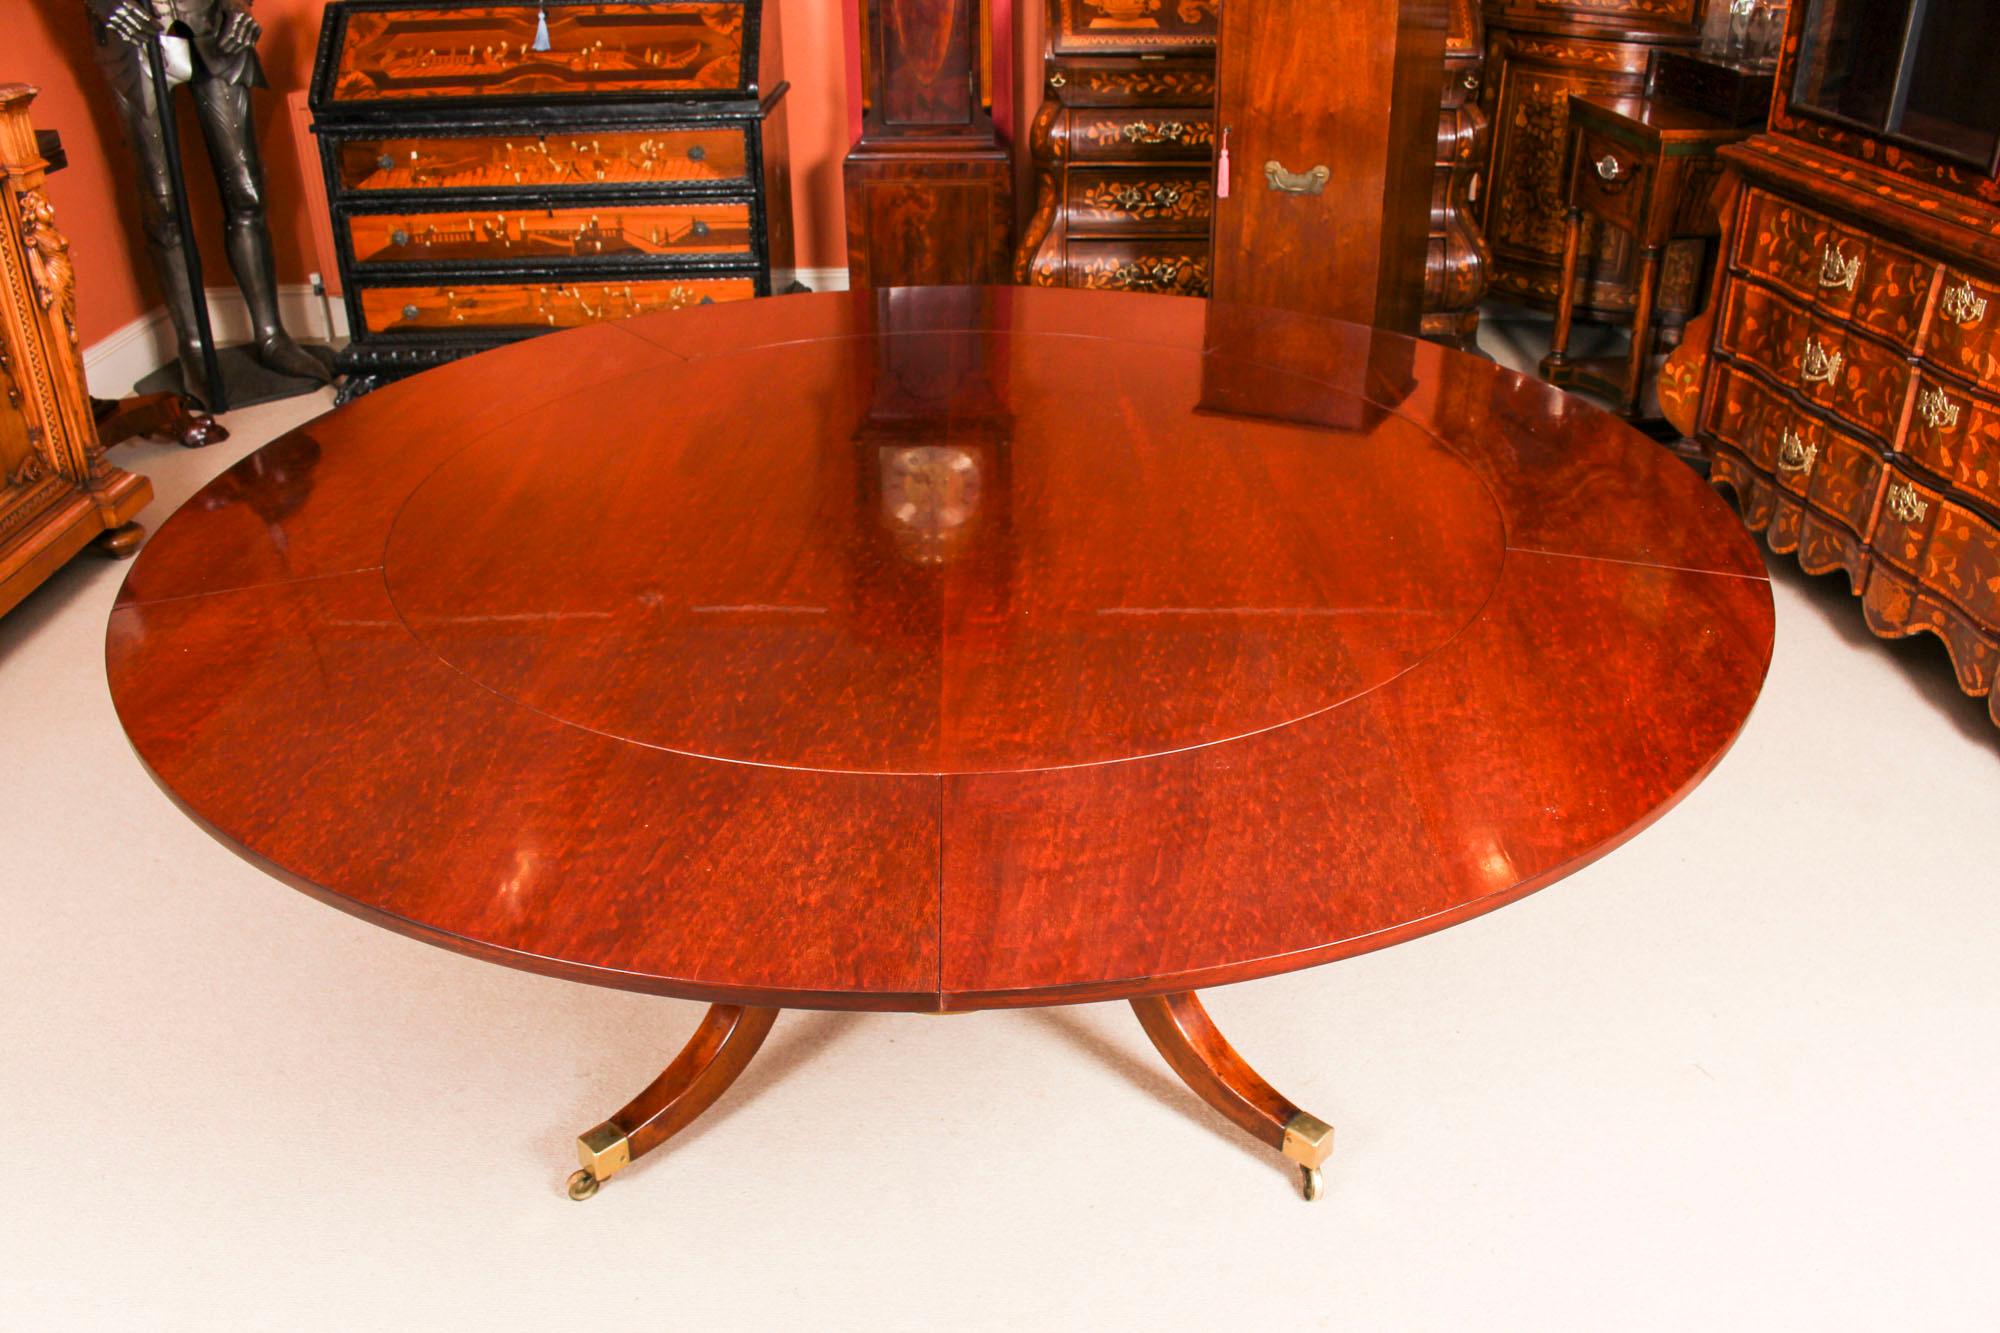 Regency Revival Vintage Mahogany Jupe Dining Table and Leaf Cabinet, Mid-20th Century